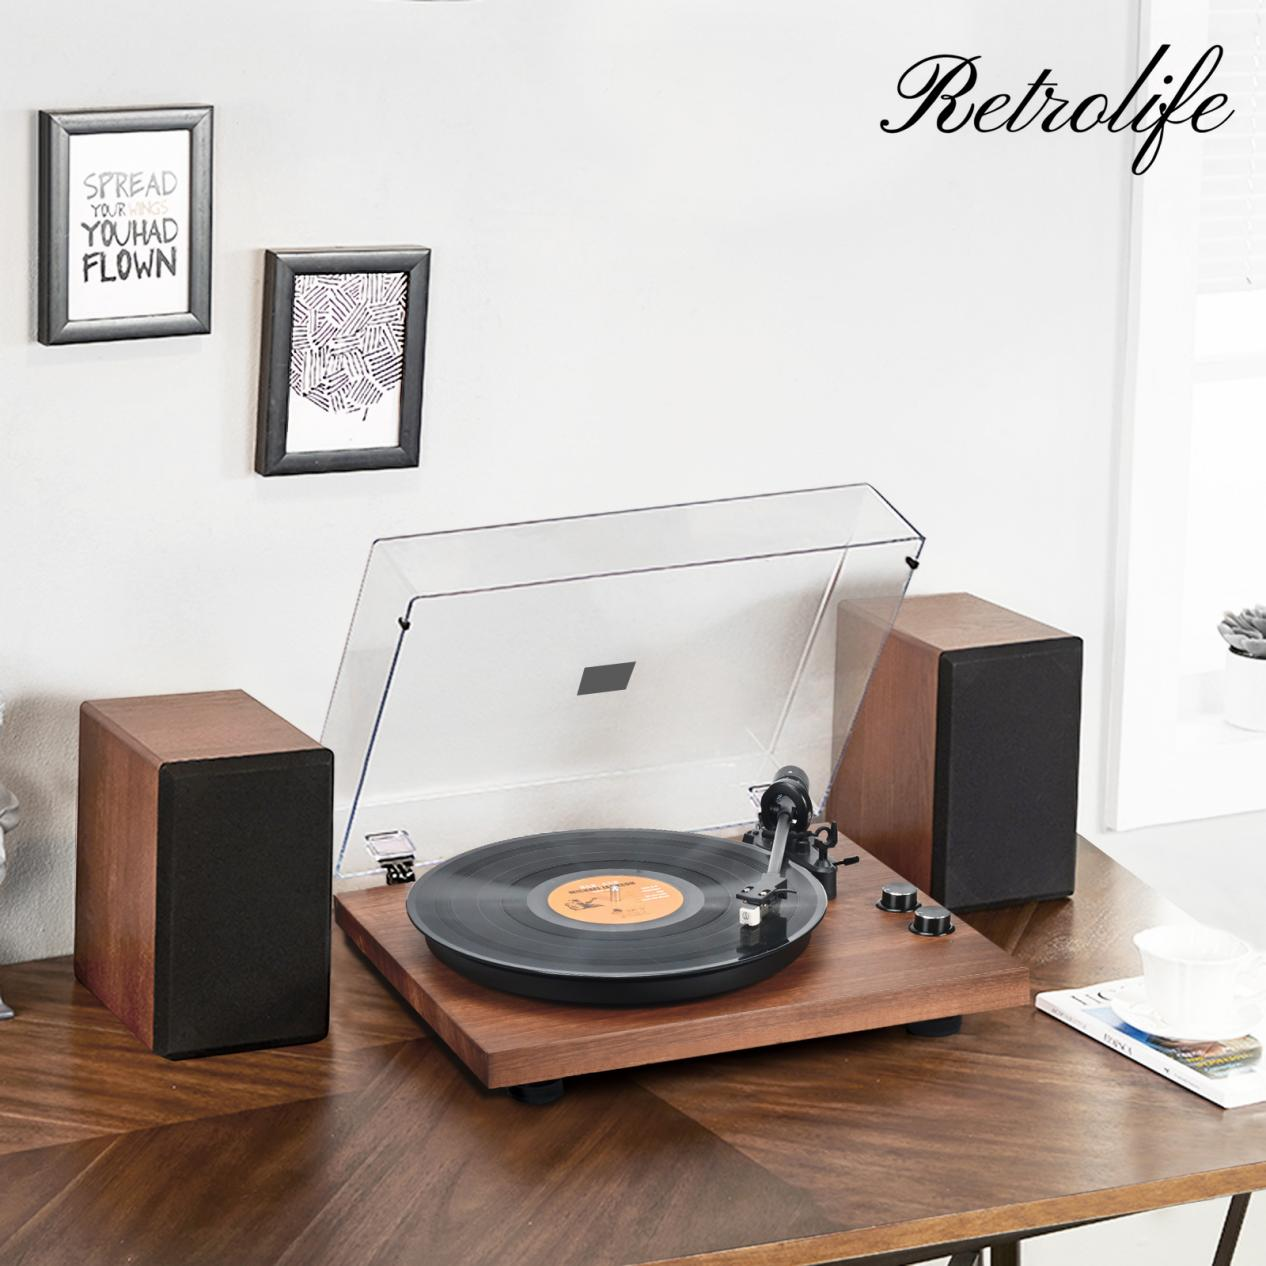 Retrolife Introduces High Fidelity Turntable with Moving Magnetic Cartridge for Retro Vinyl Music Fans